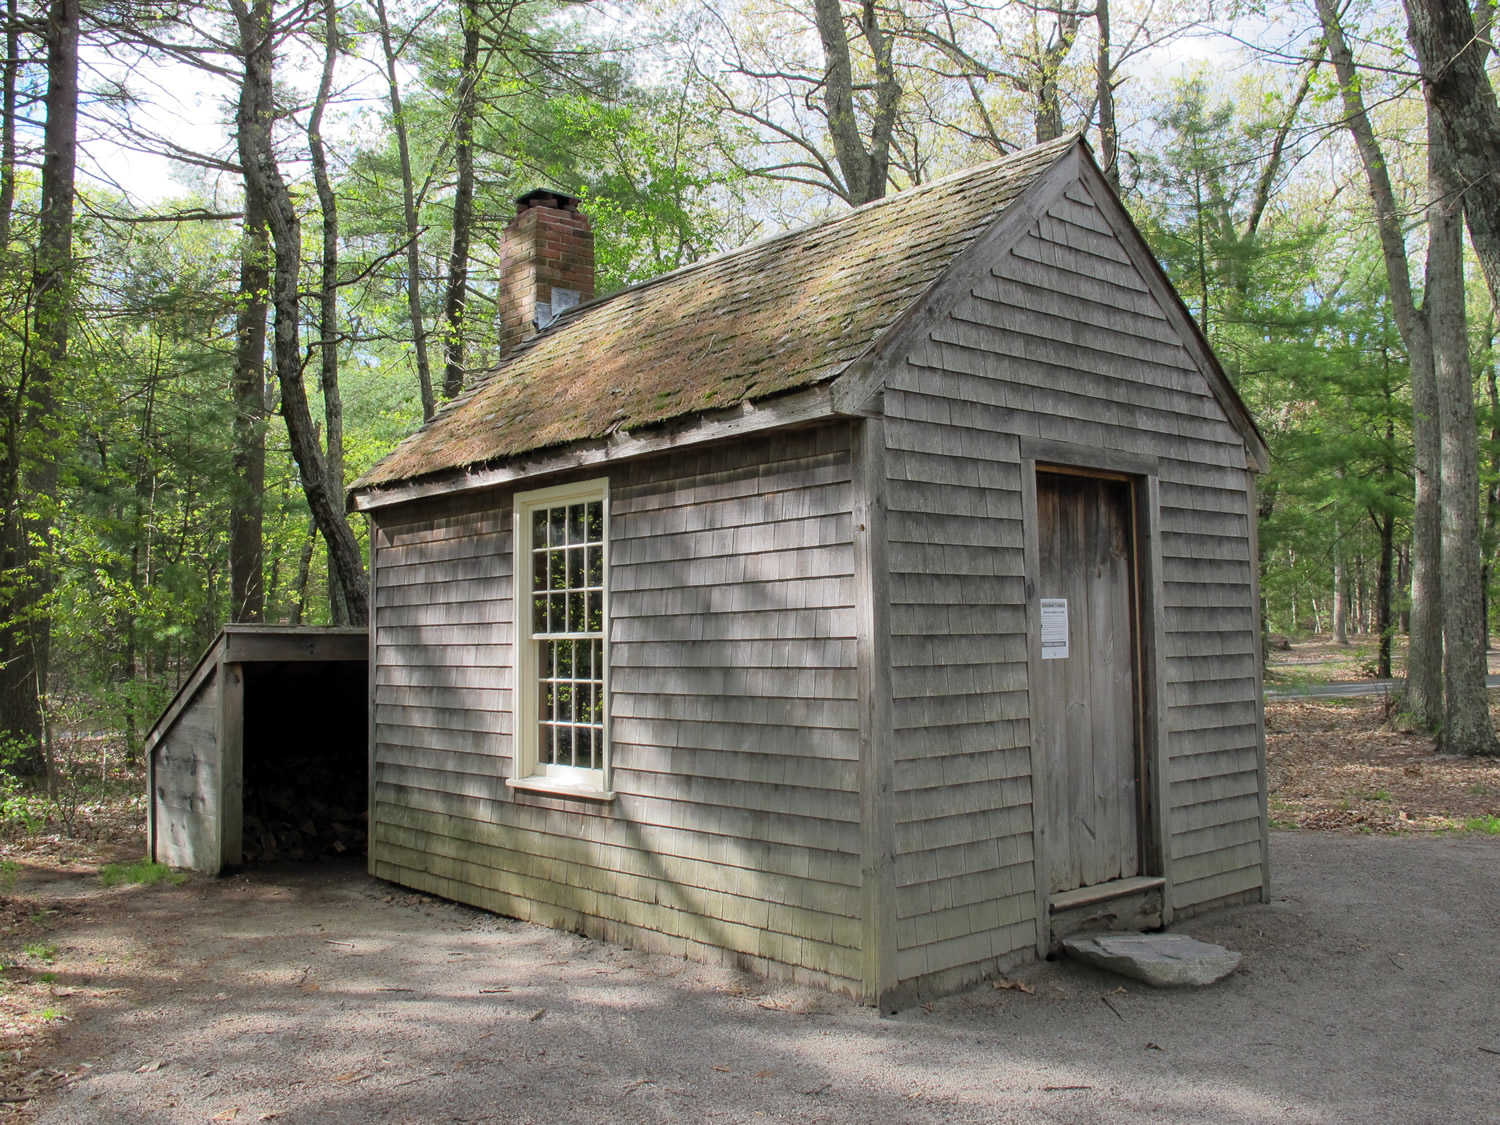 Replica of Thoreau's house at Walden Pond, Concord MA